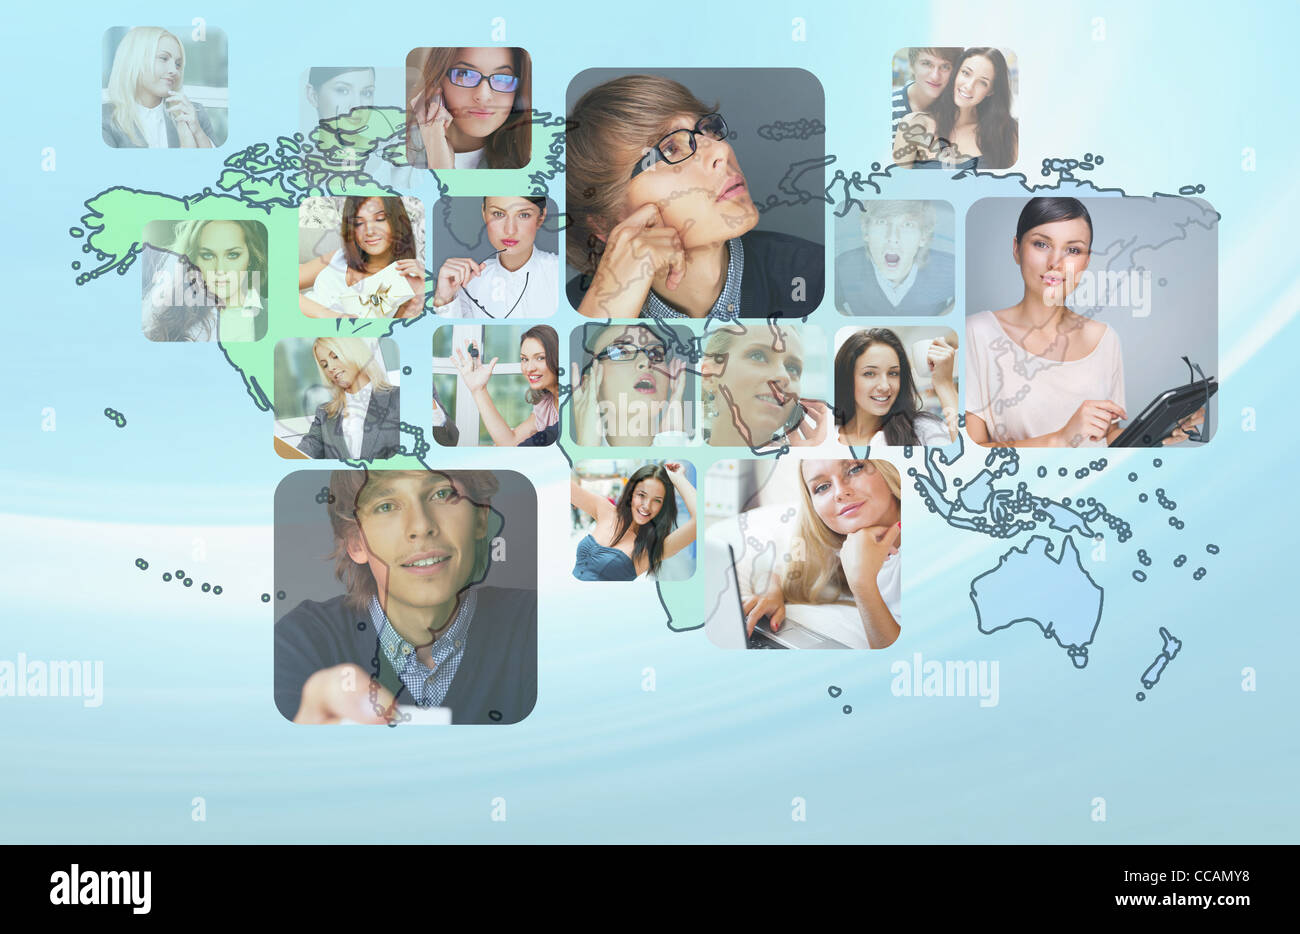 Graphic design background. World map and photo of different people across the world. Online community concept Stock Photo